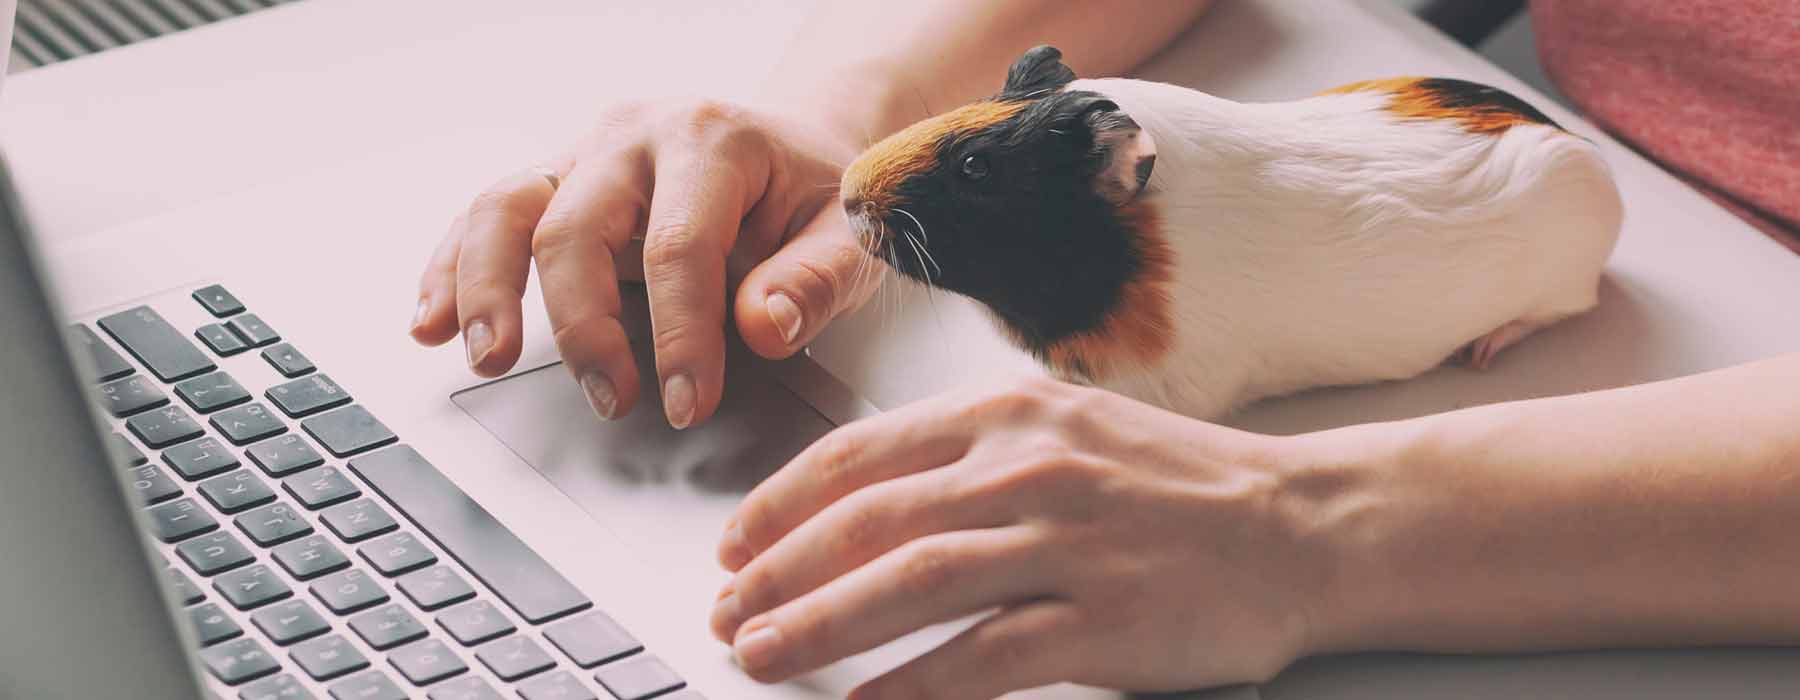 guinea pig in front of a laptop computer